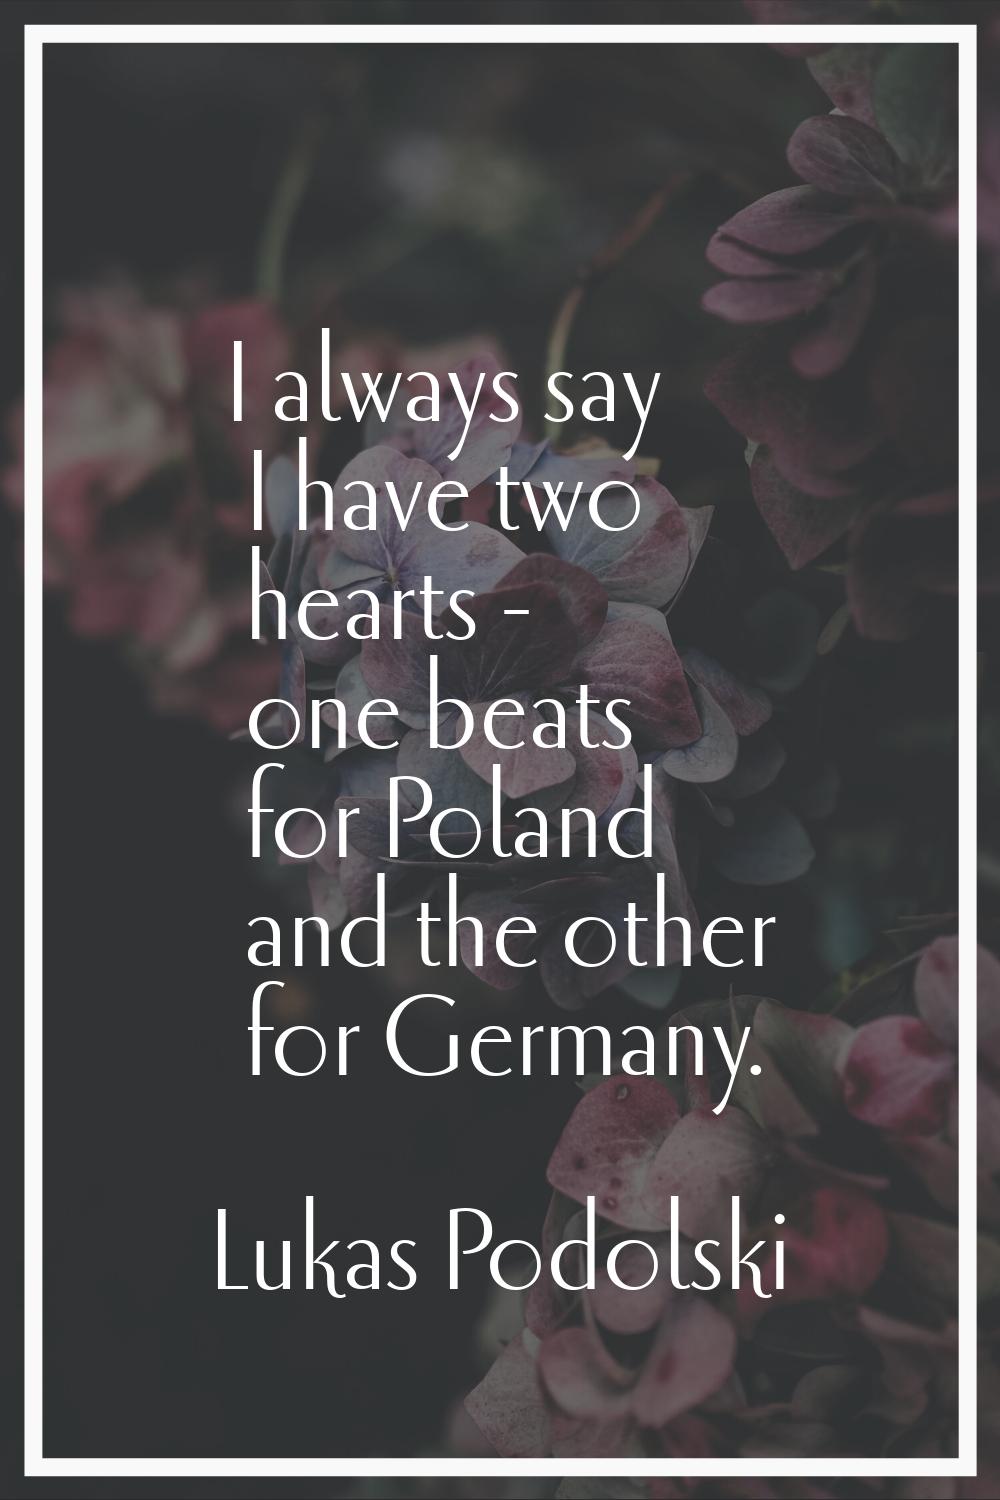 I always say I have two hearts - one beats for Poland and the other for Germany.